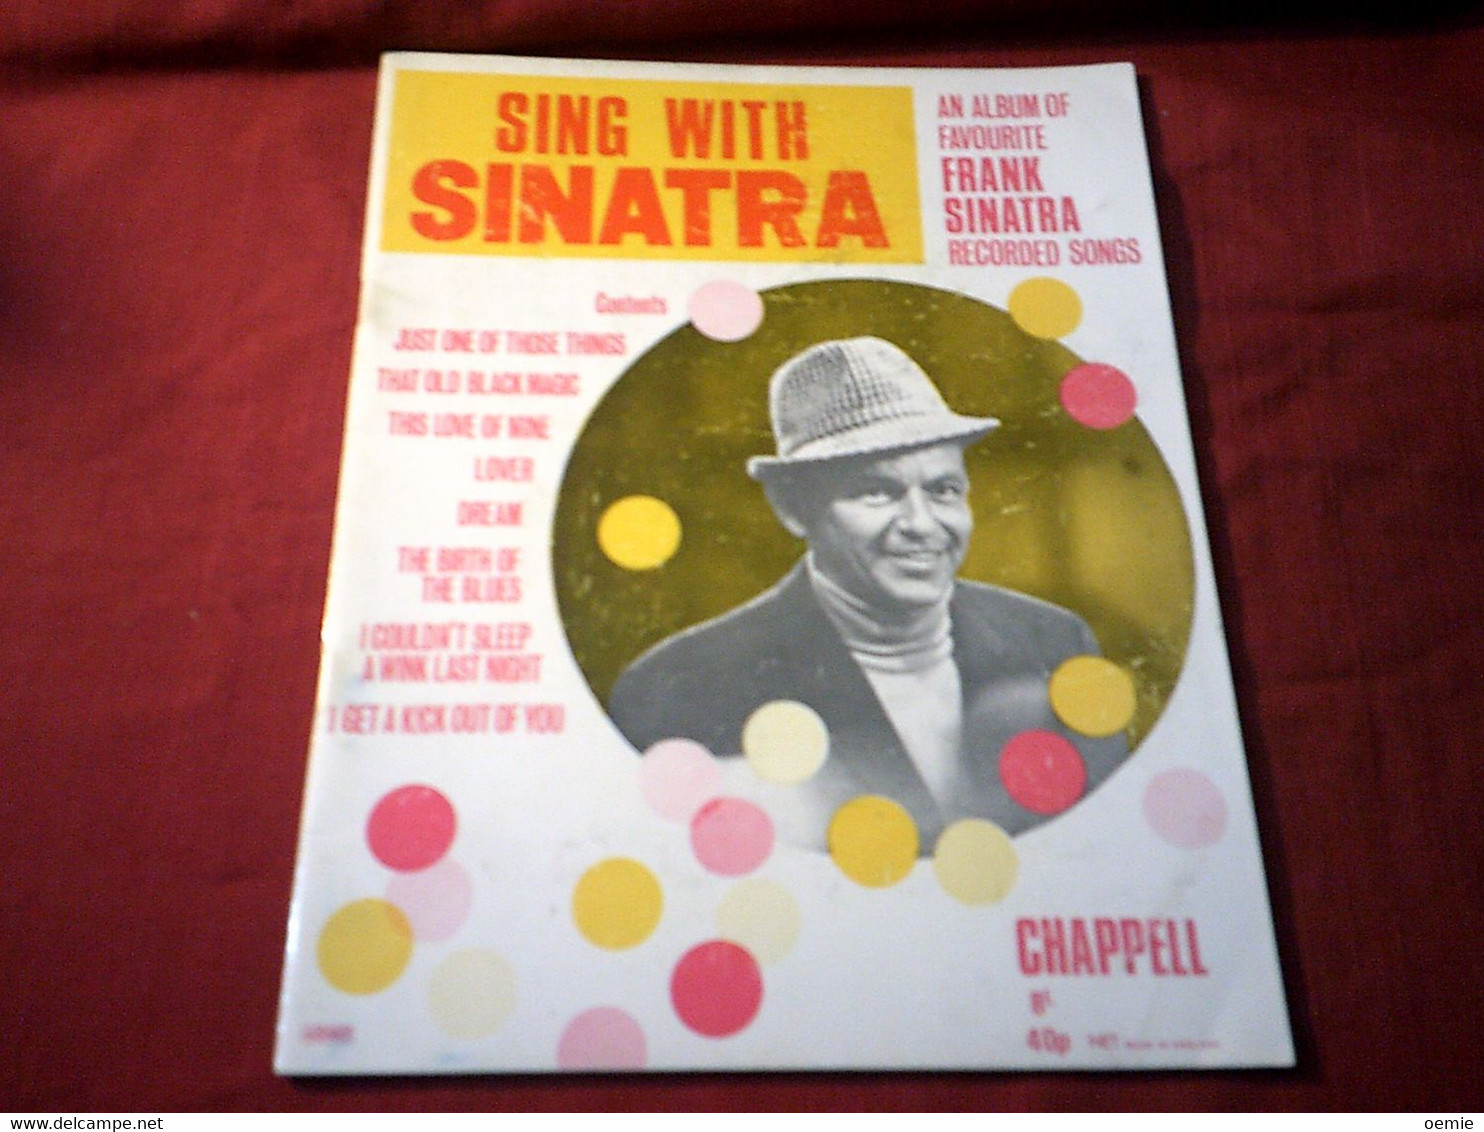 SING WHIT SINATRA     / AND ALBUM OF FAVORITE FRANK SINATRA RECORDED SONGS // CHAPPELL MADE IN ANGLAND - Kultur